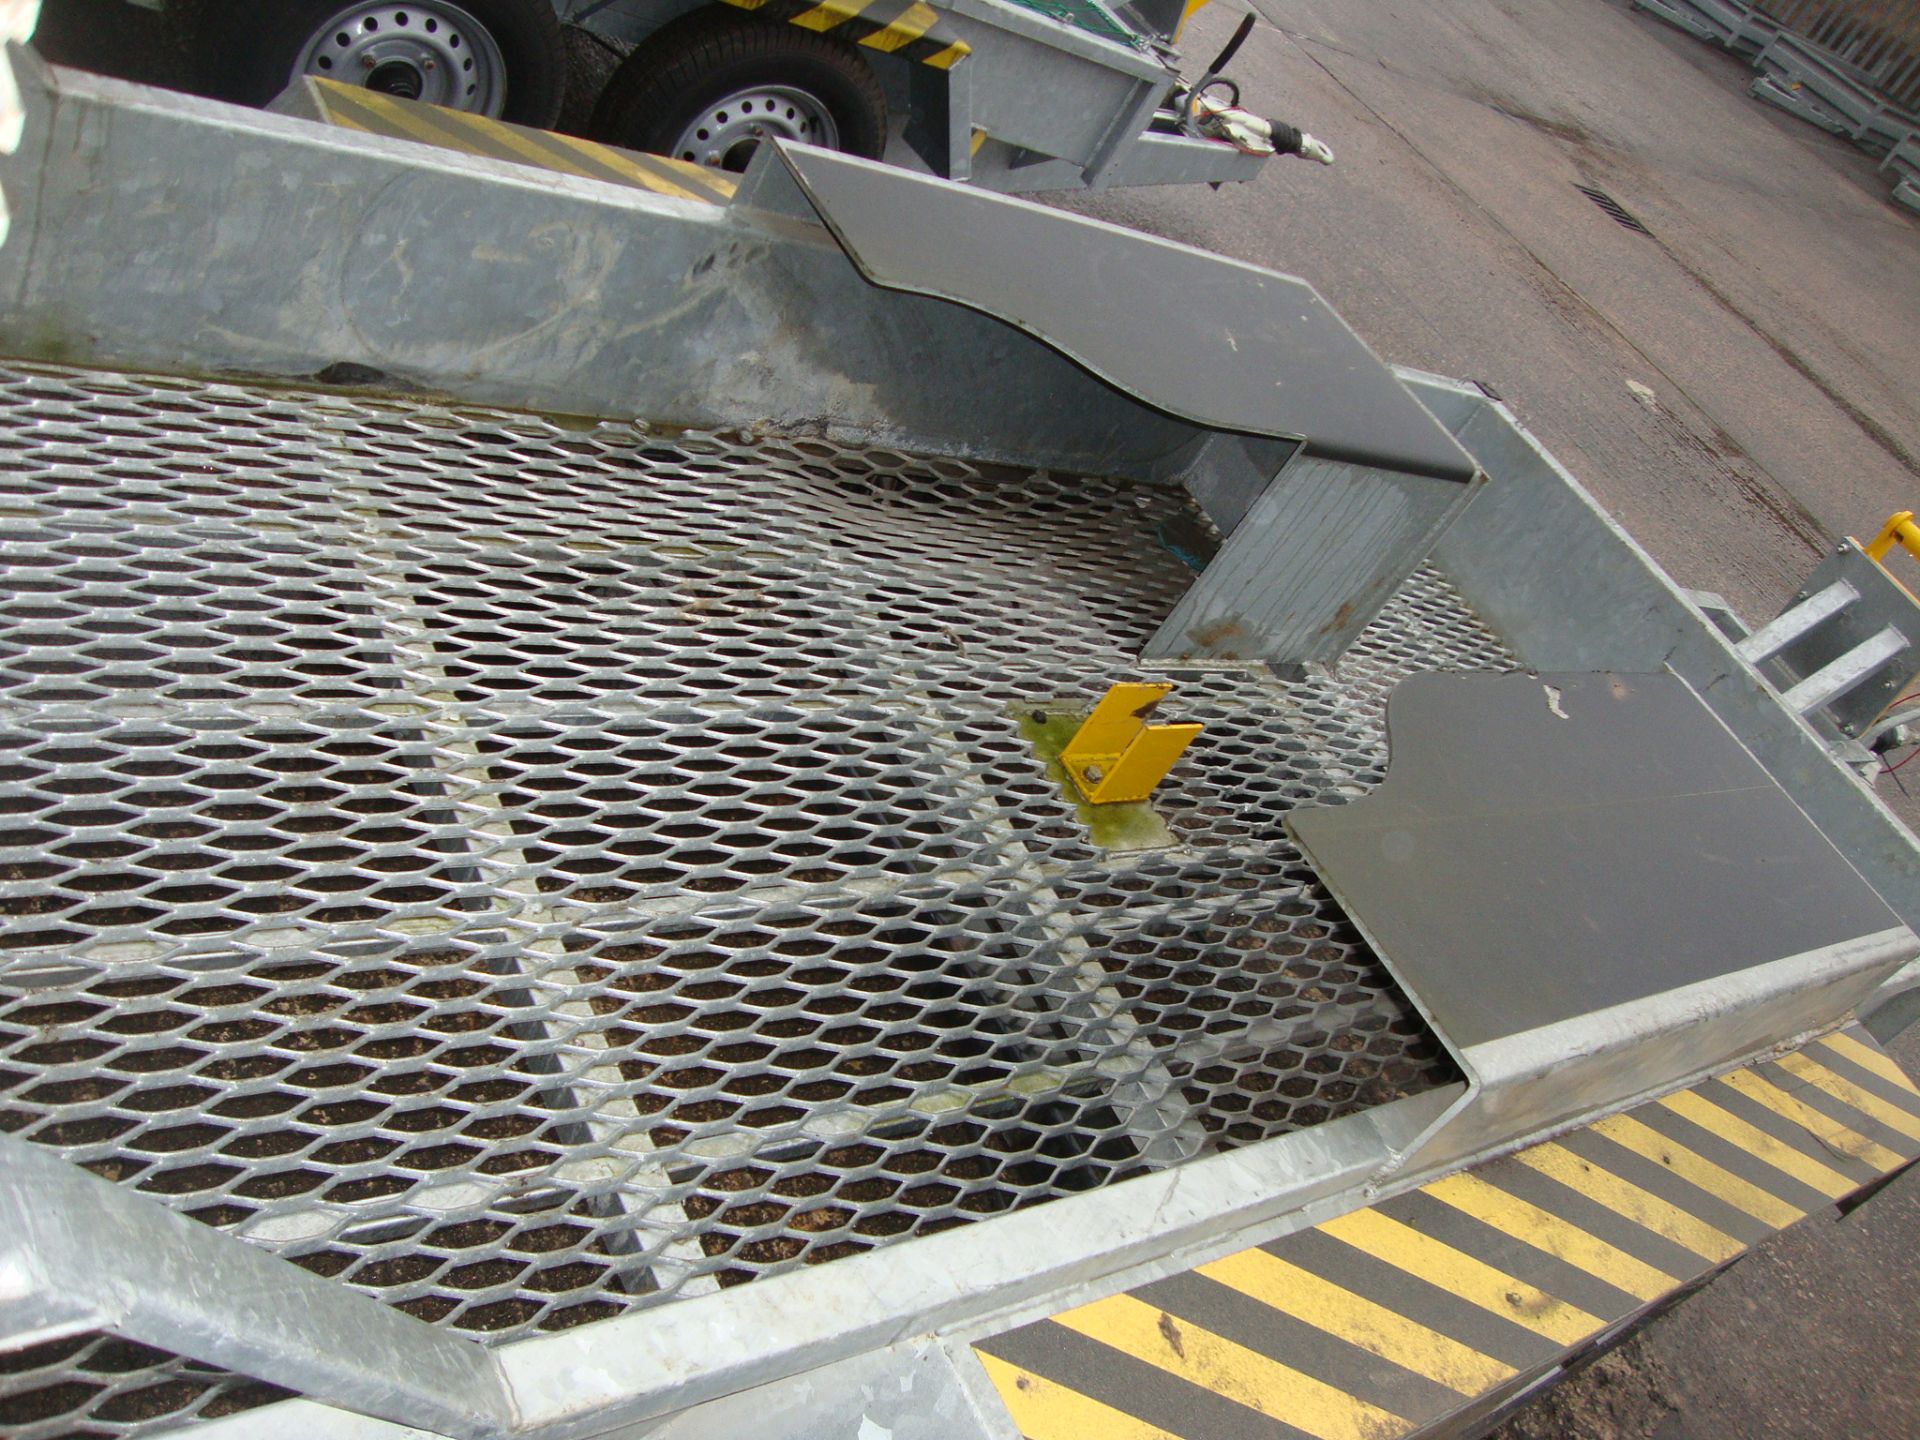 Mini digger/excavator specialist trailer incorporating large drive-on ramp at rear, shrouds for - Image 8 of 9